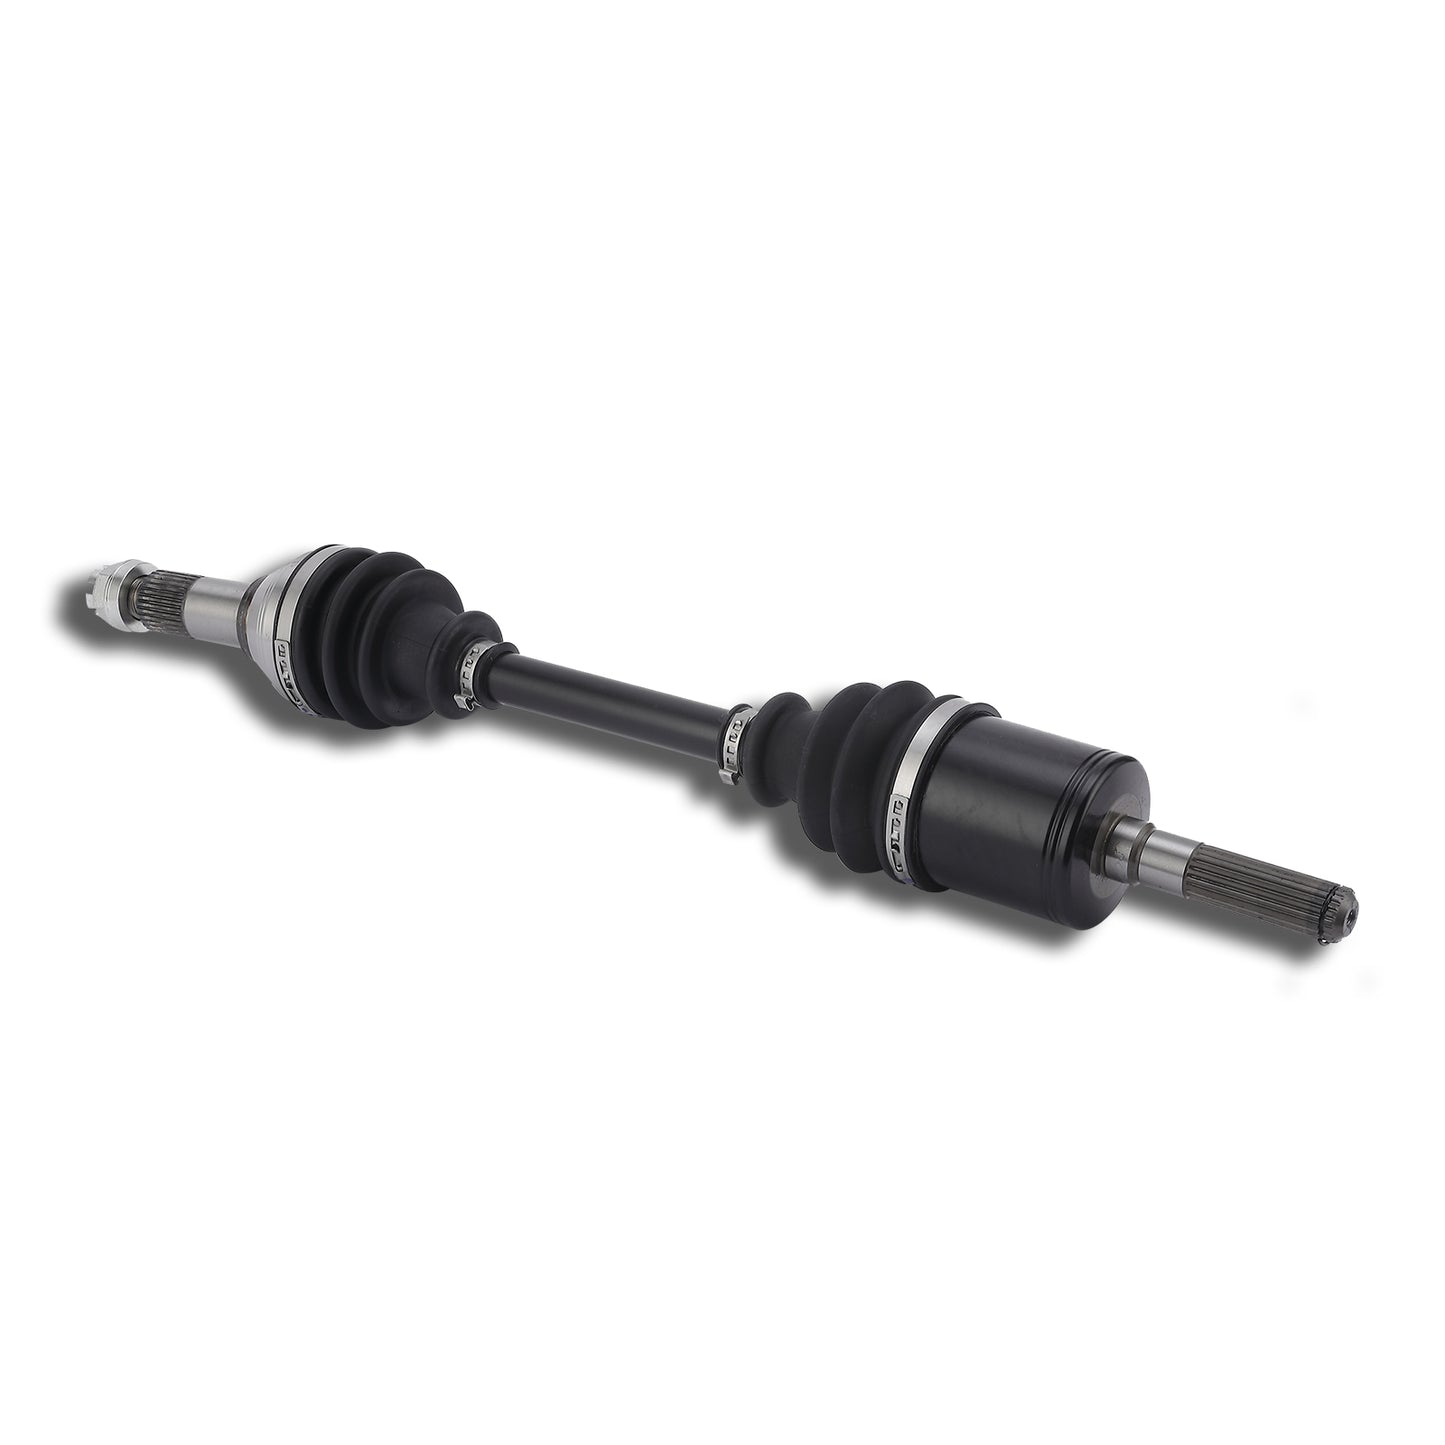 1 CAM-CA130 and 1 CAM-CA-230 Front Left Drive Shaft CV Axle for 2021-2020 MAVERICK TRAIL 800 705402008